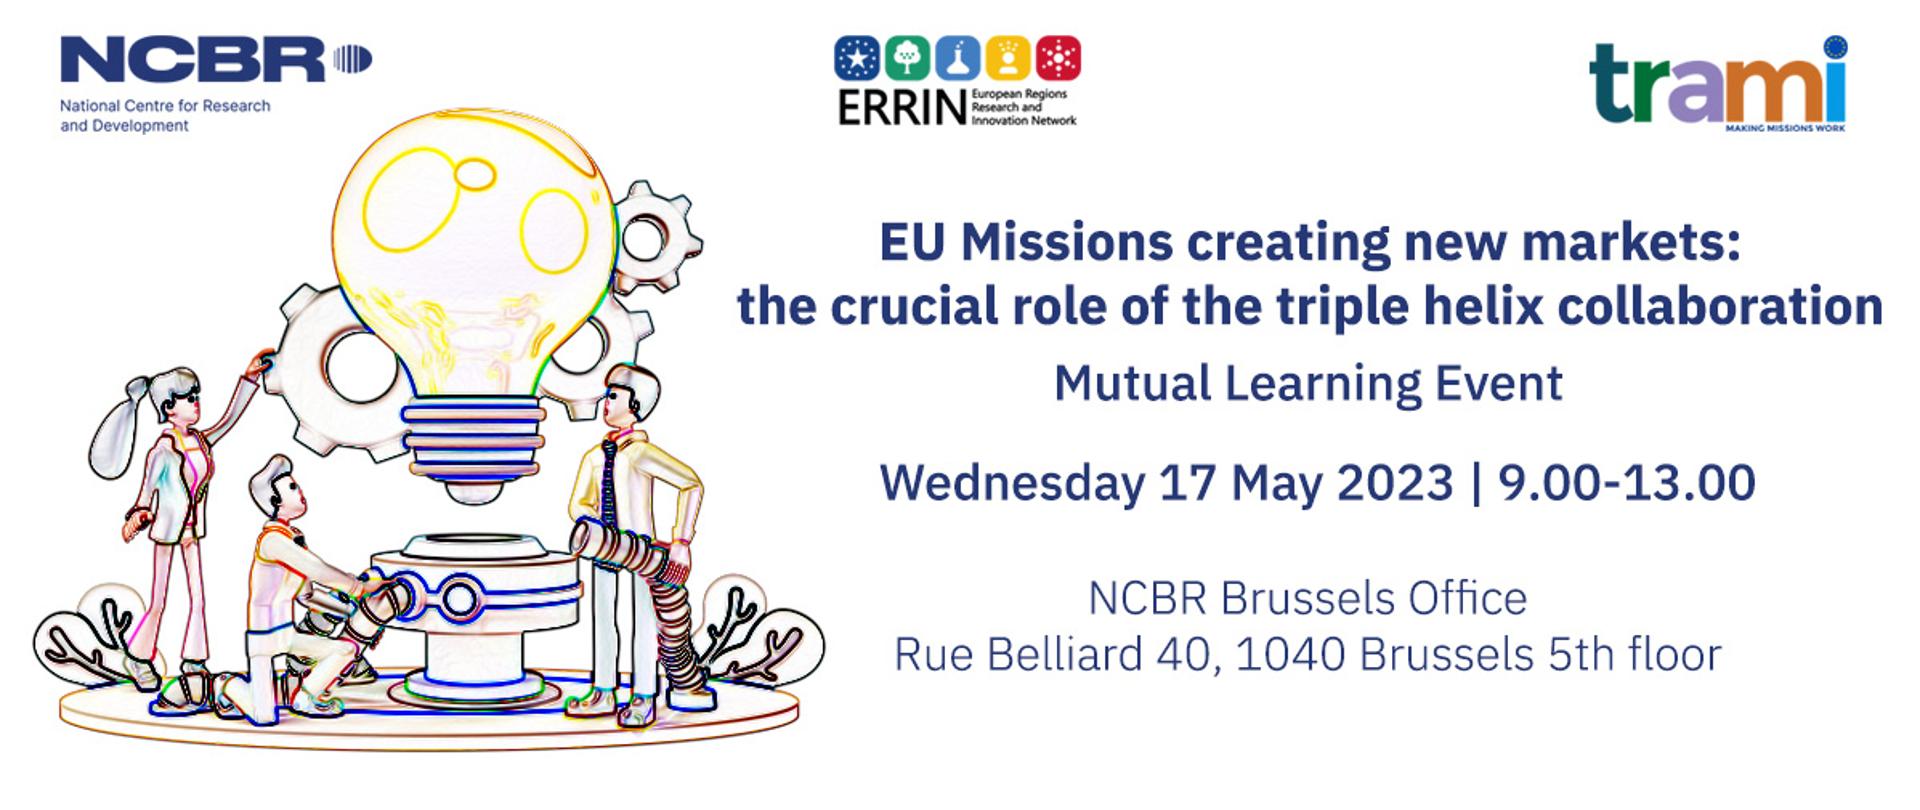 EU Missions creating new markets: the crucial role of the triple helix collaboration, 17th May, Brussels